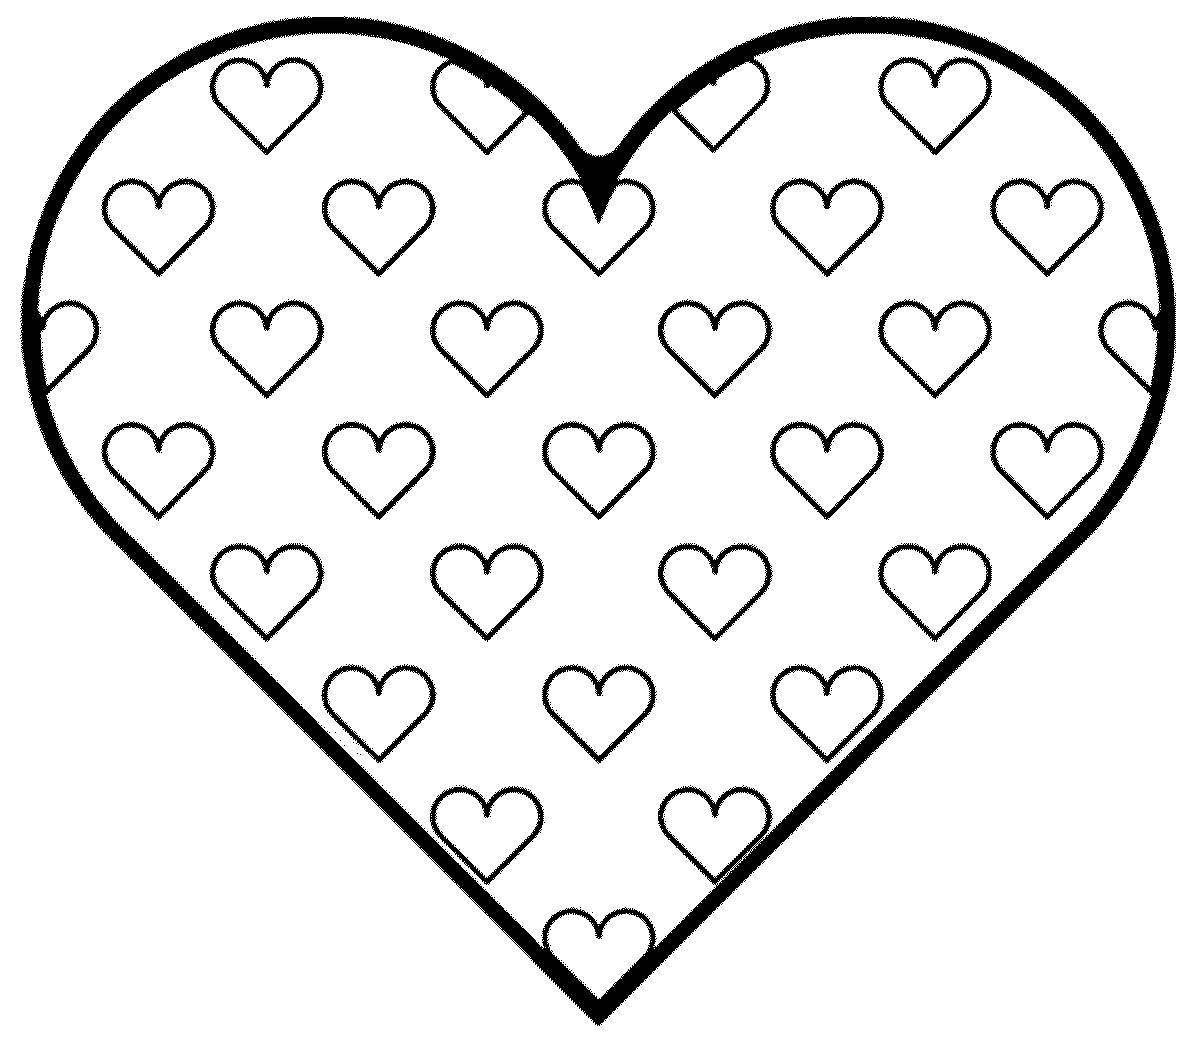 Lovely little heart coloring book